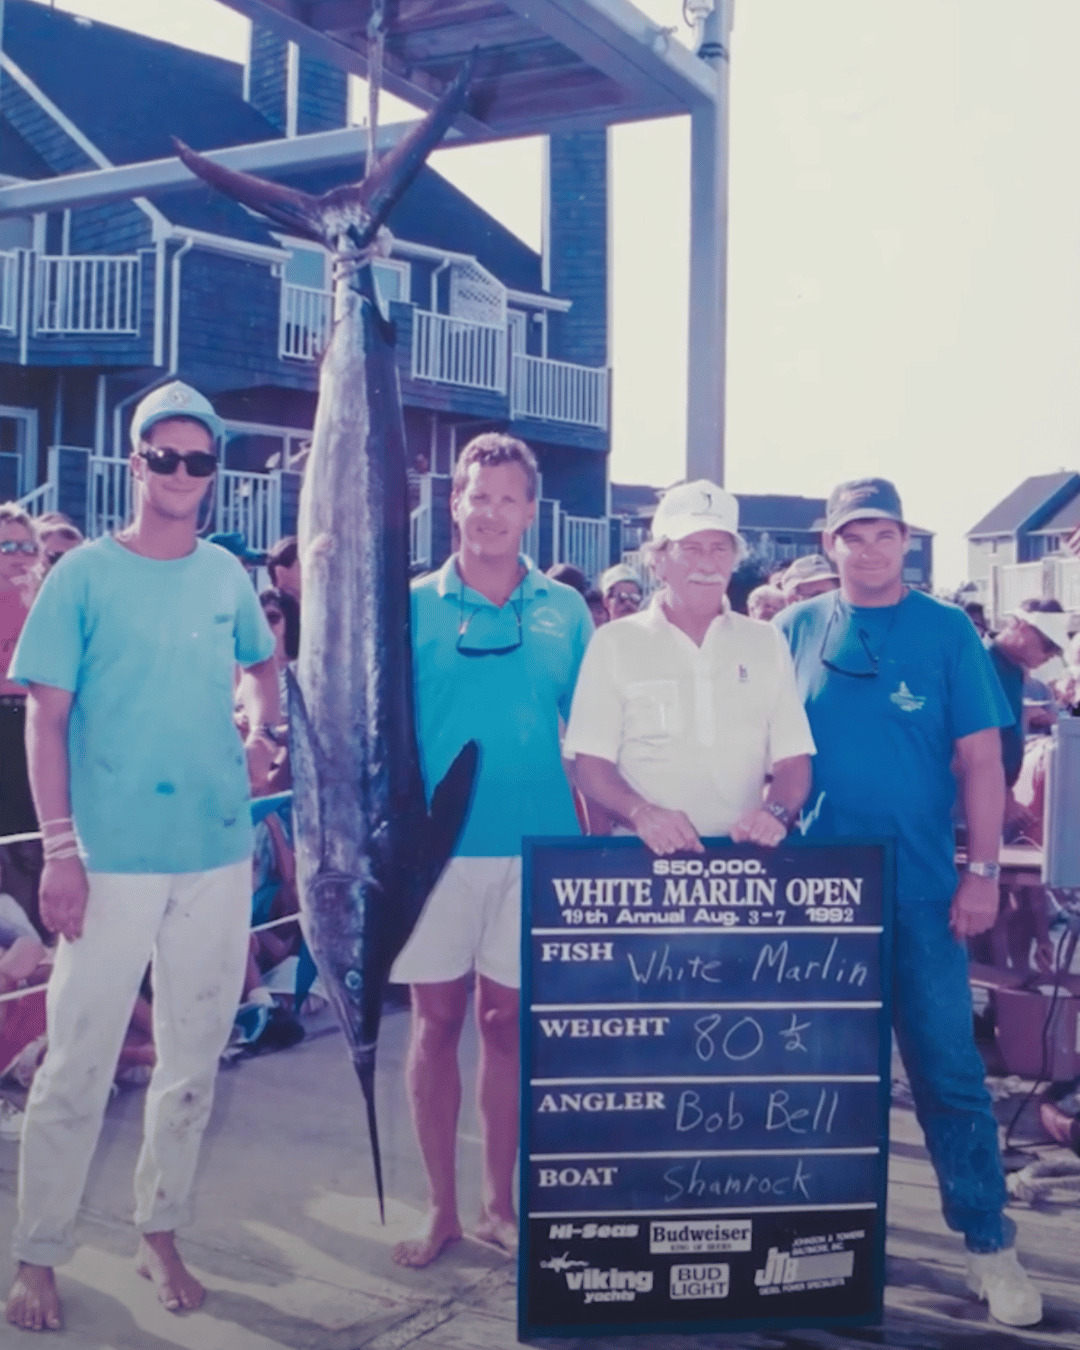 Anglers weighing a white marlin at Harborside Marina for the White Marlin Open in 1992. 